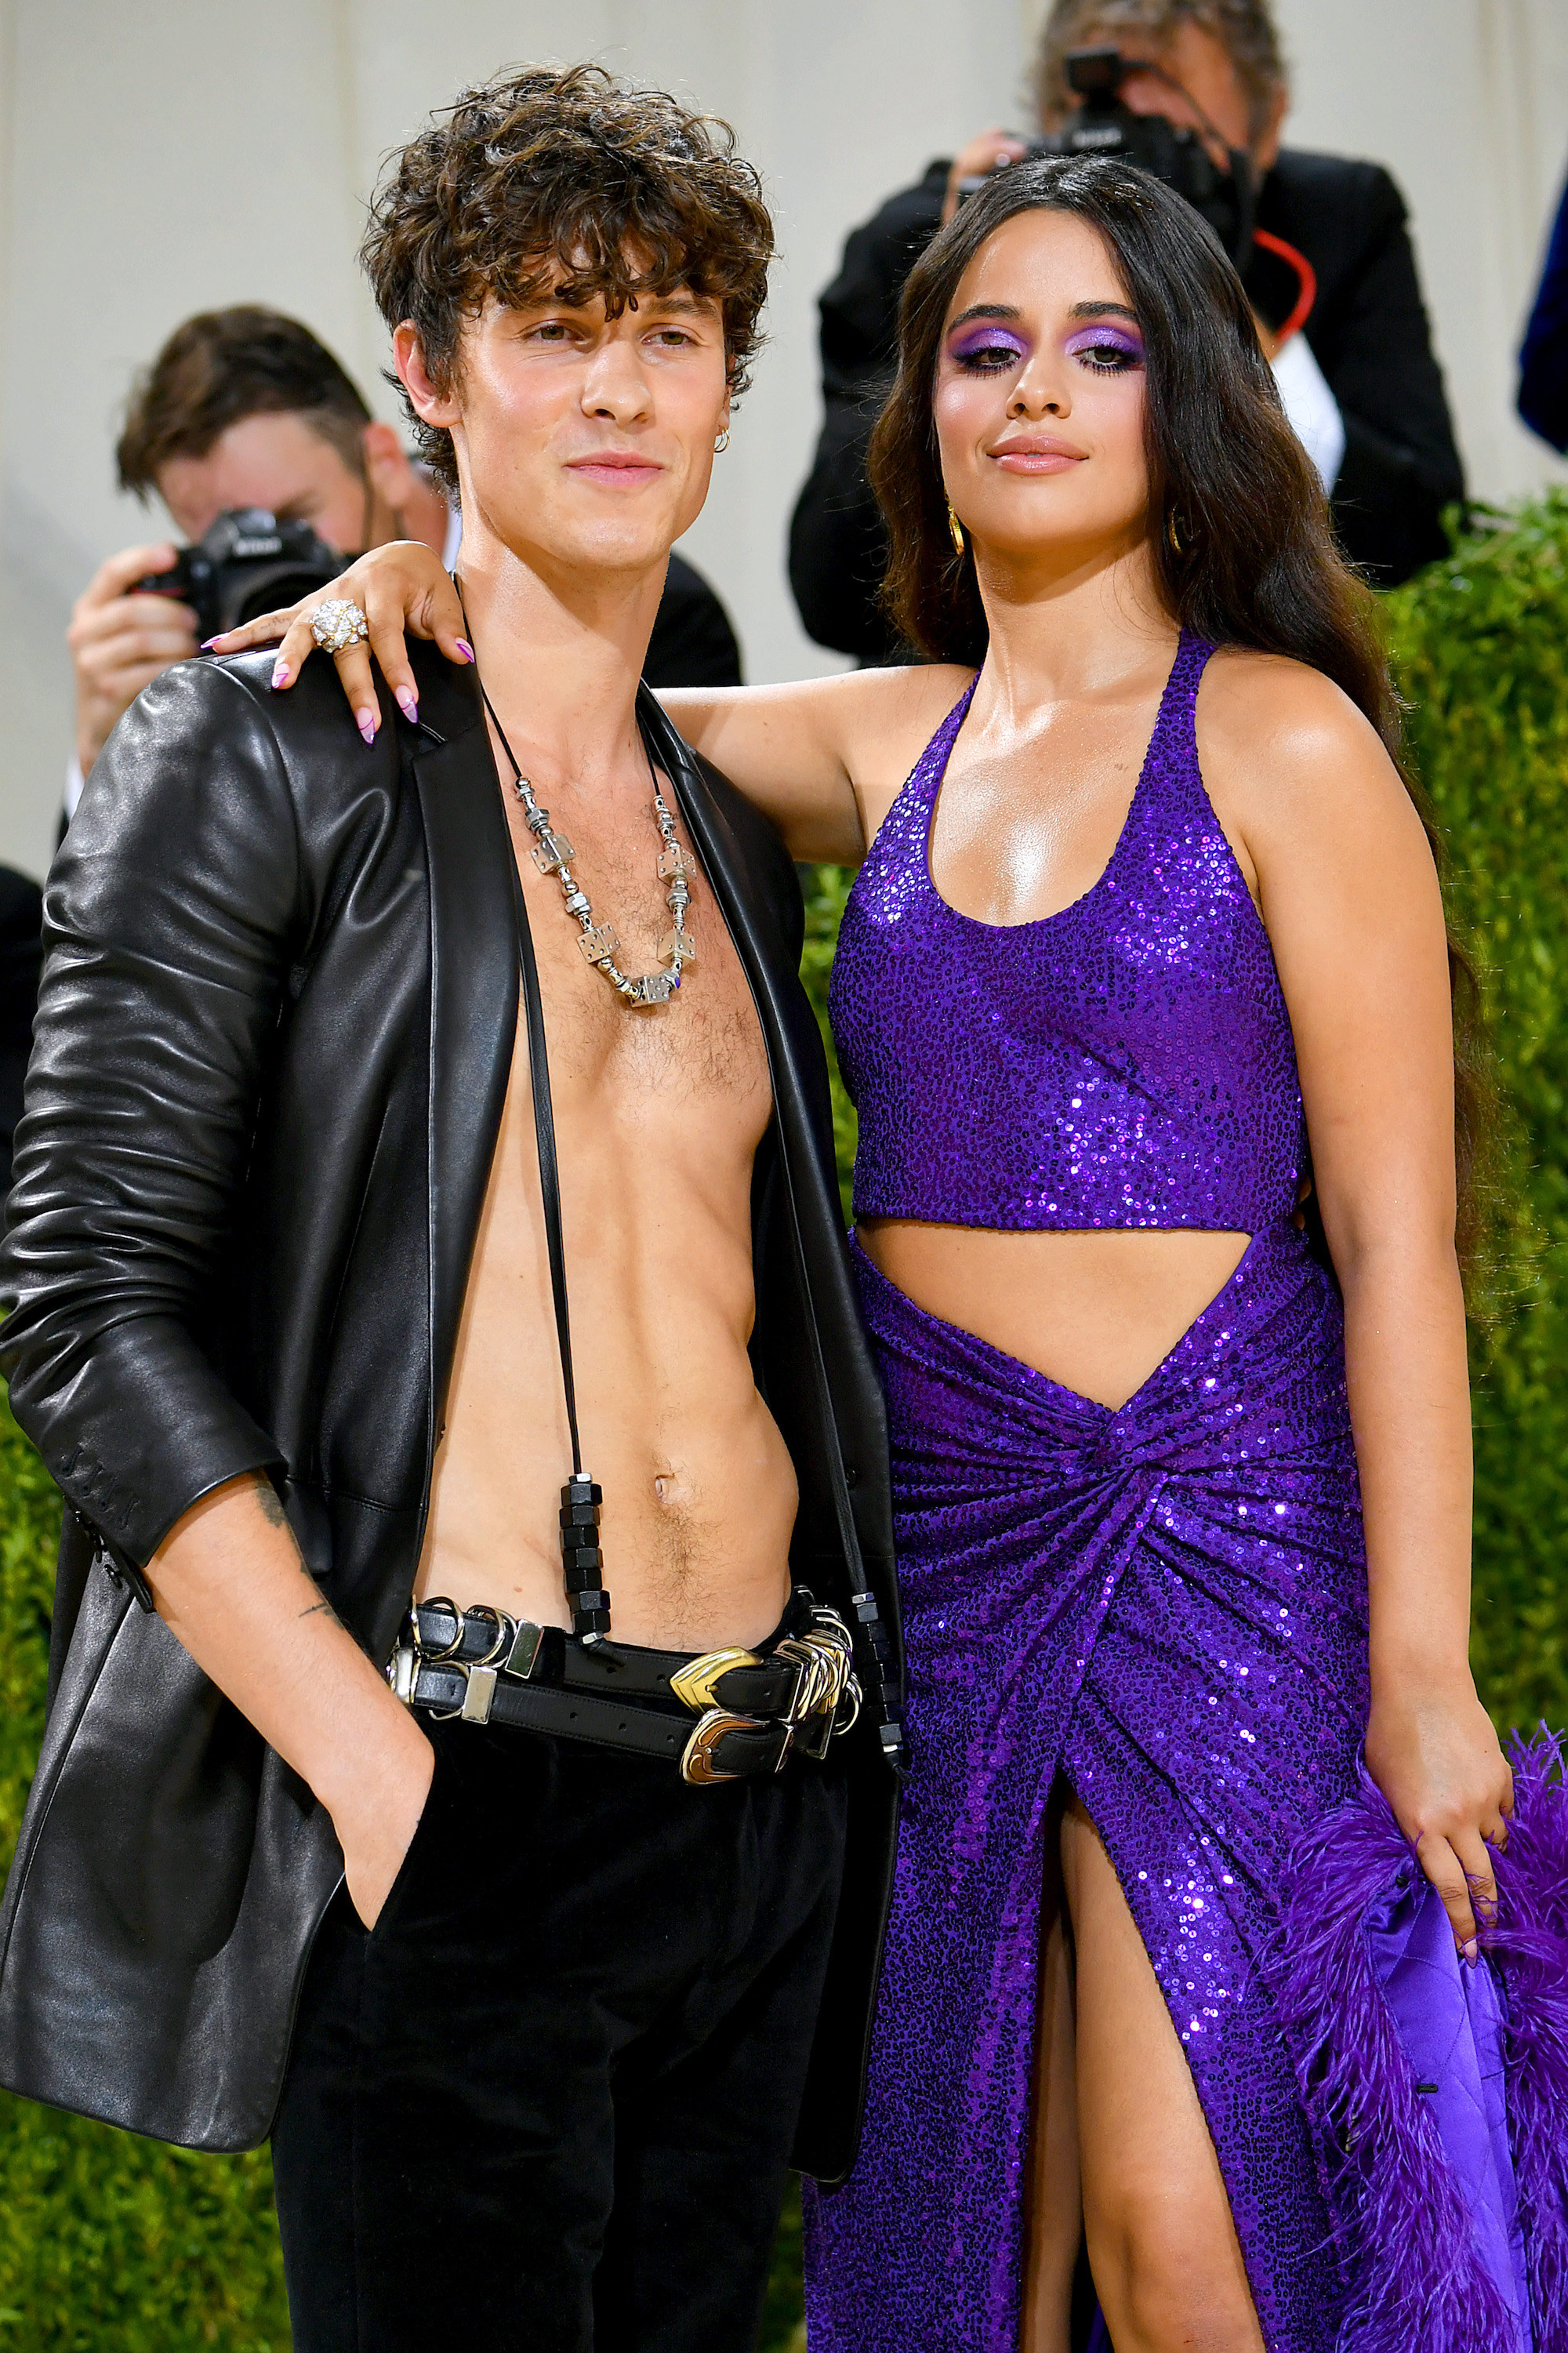 Camilla with her arm around Shaun at the MET Gala